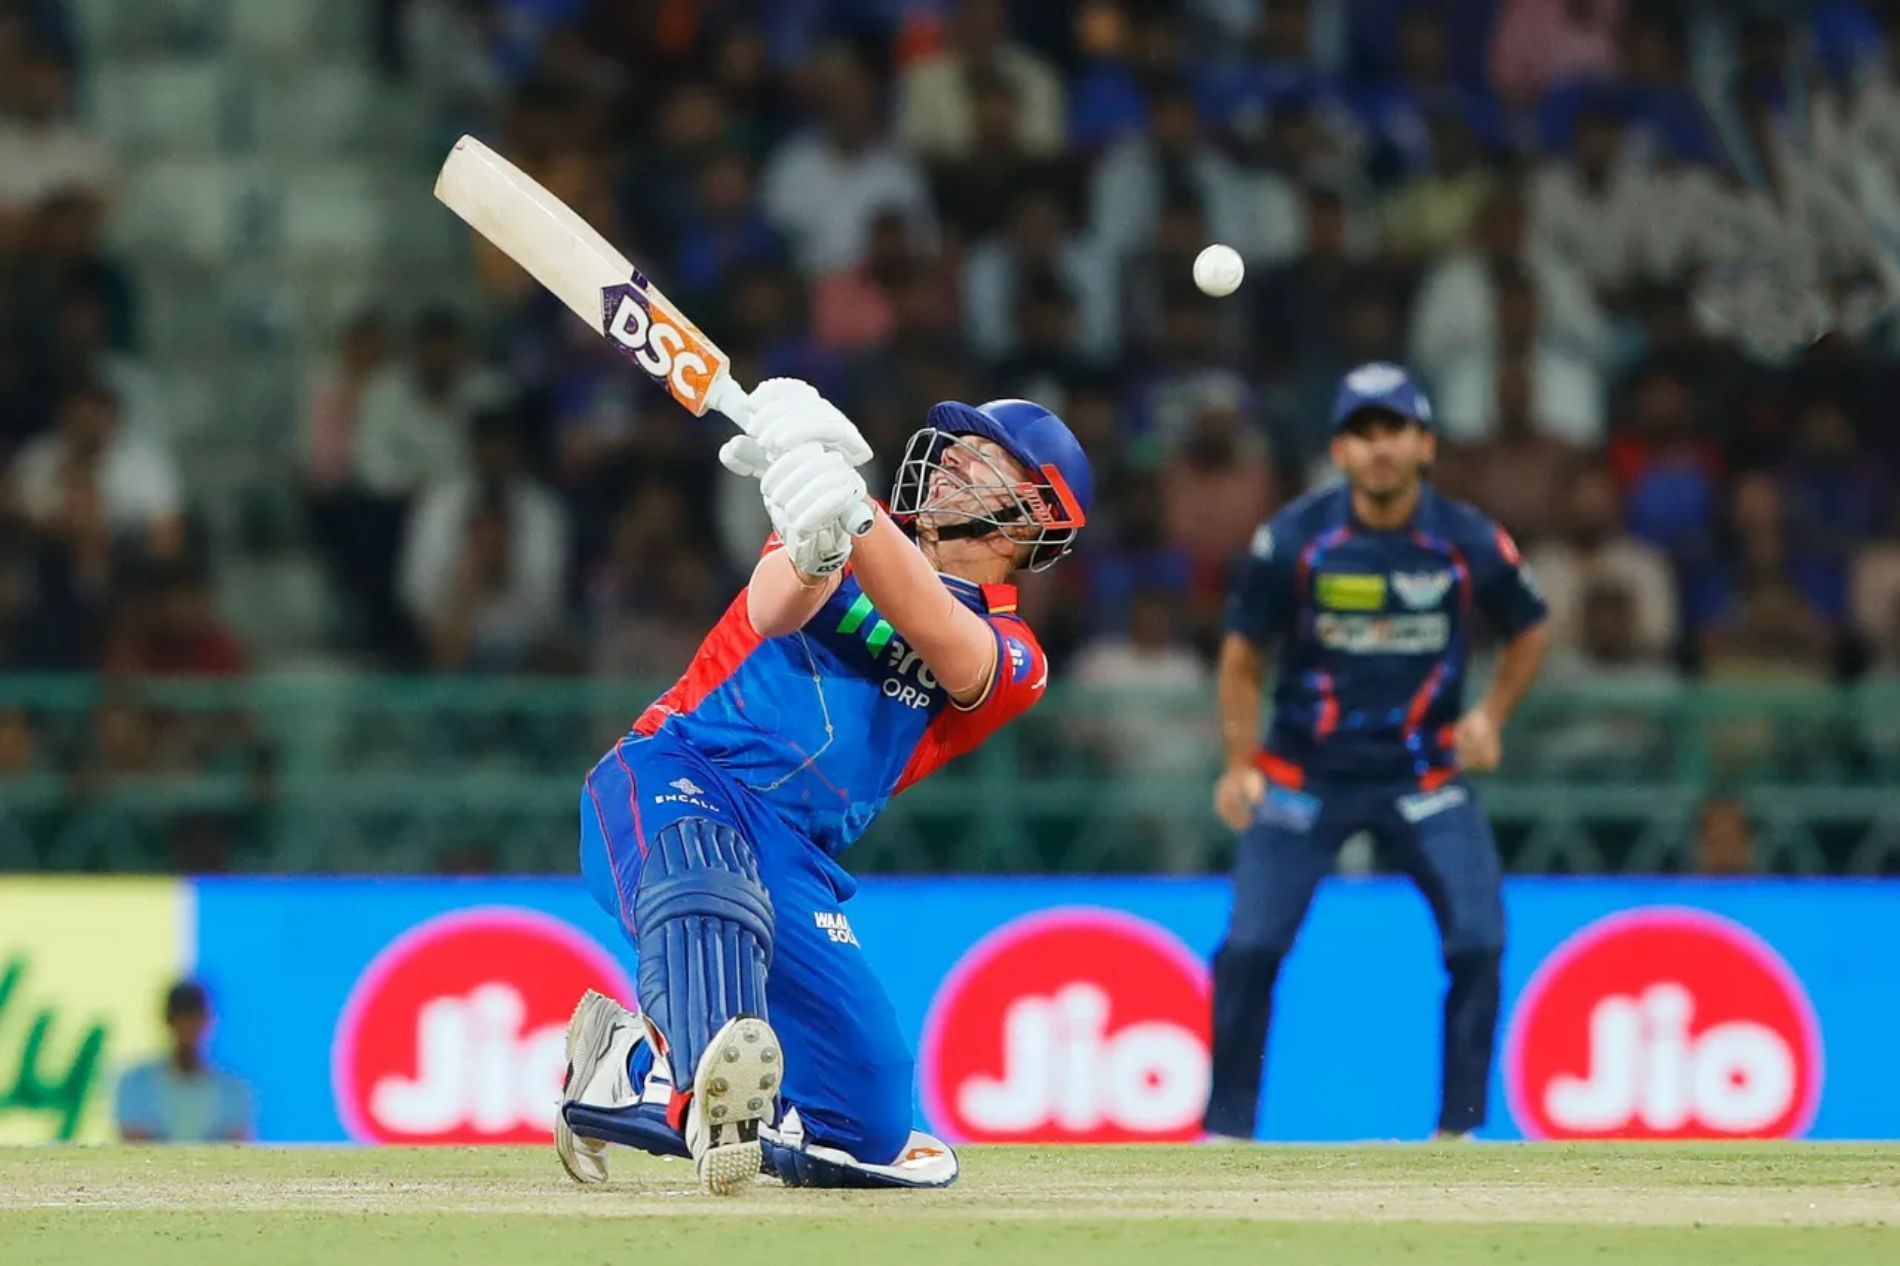 David Warner was out of sorts with the willow. (Pic: BCCI/ iplt20.com)